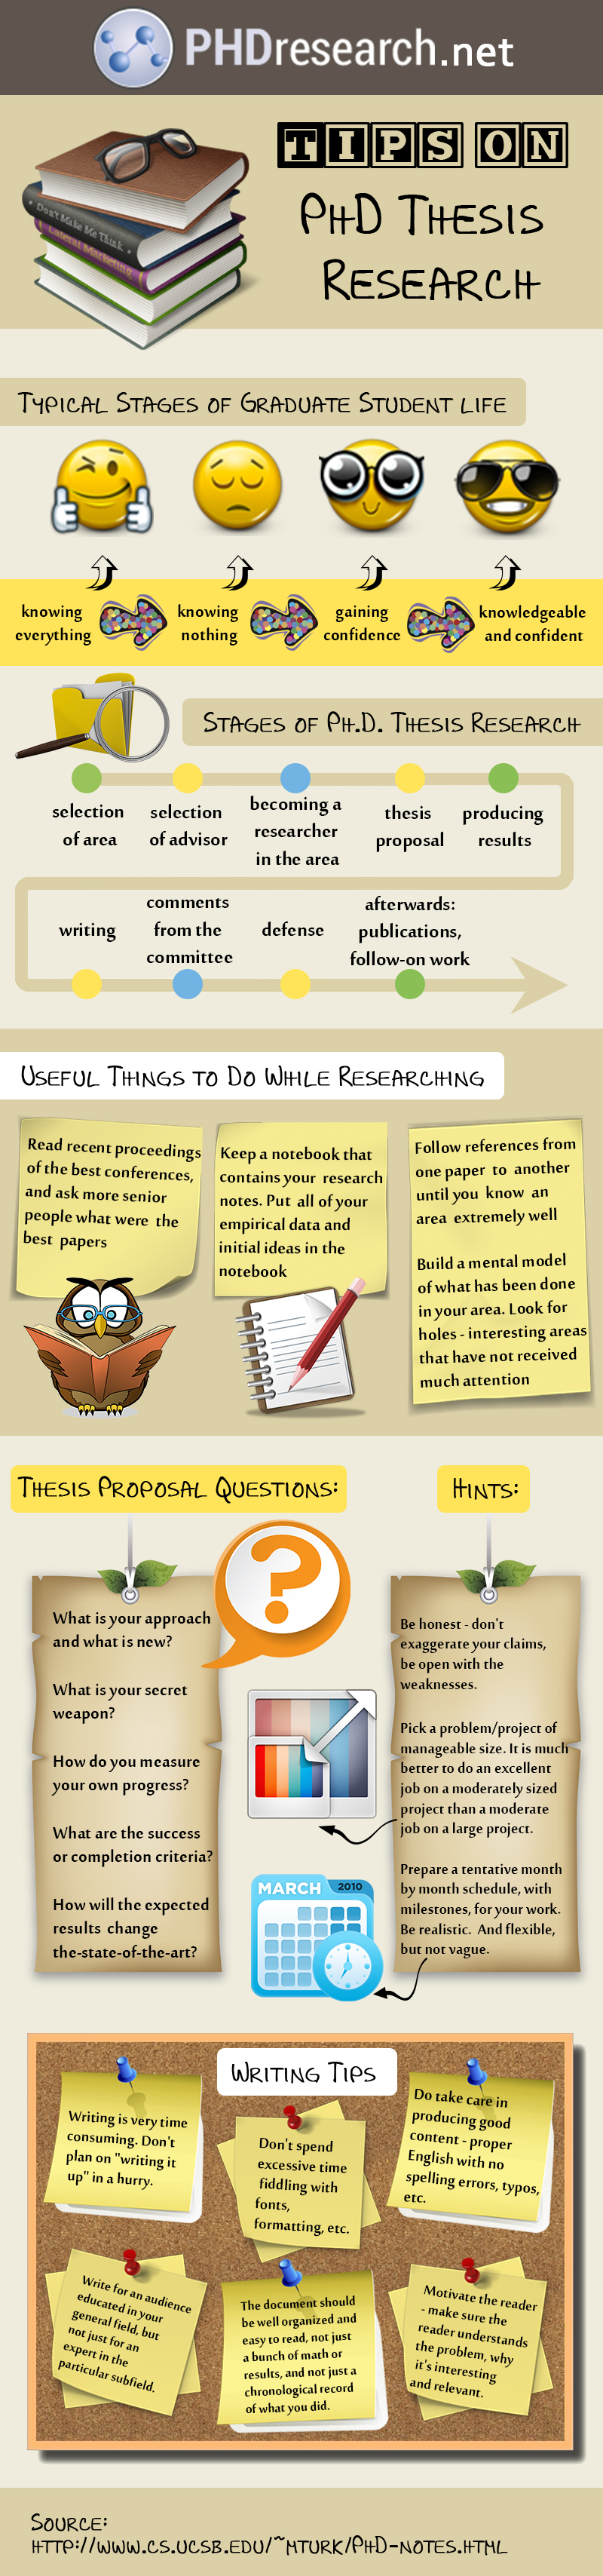 Tips on PhD Thesis Research